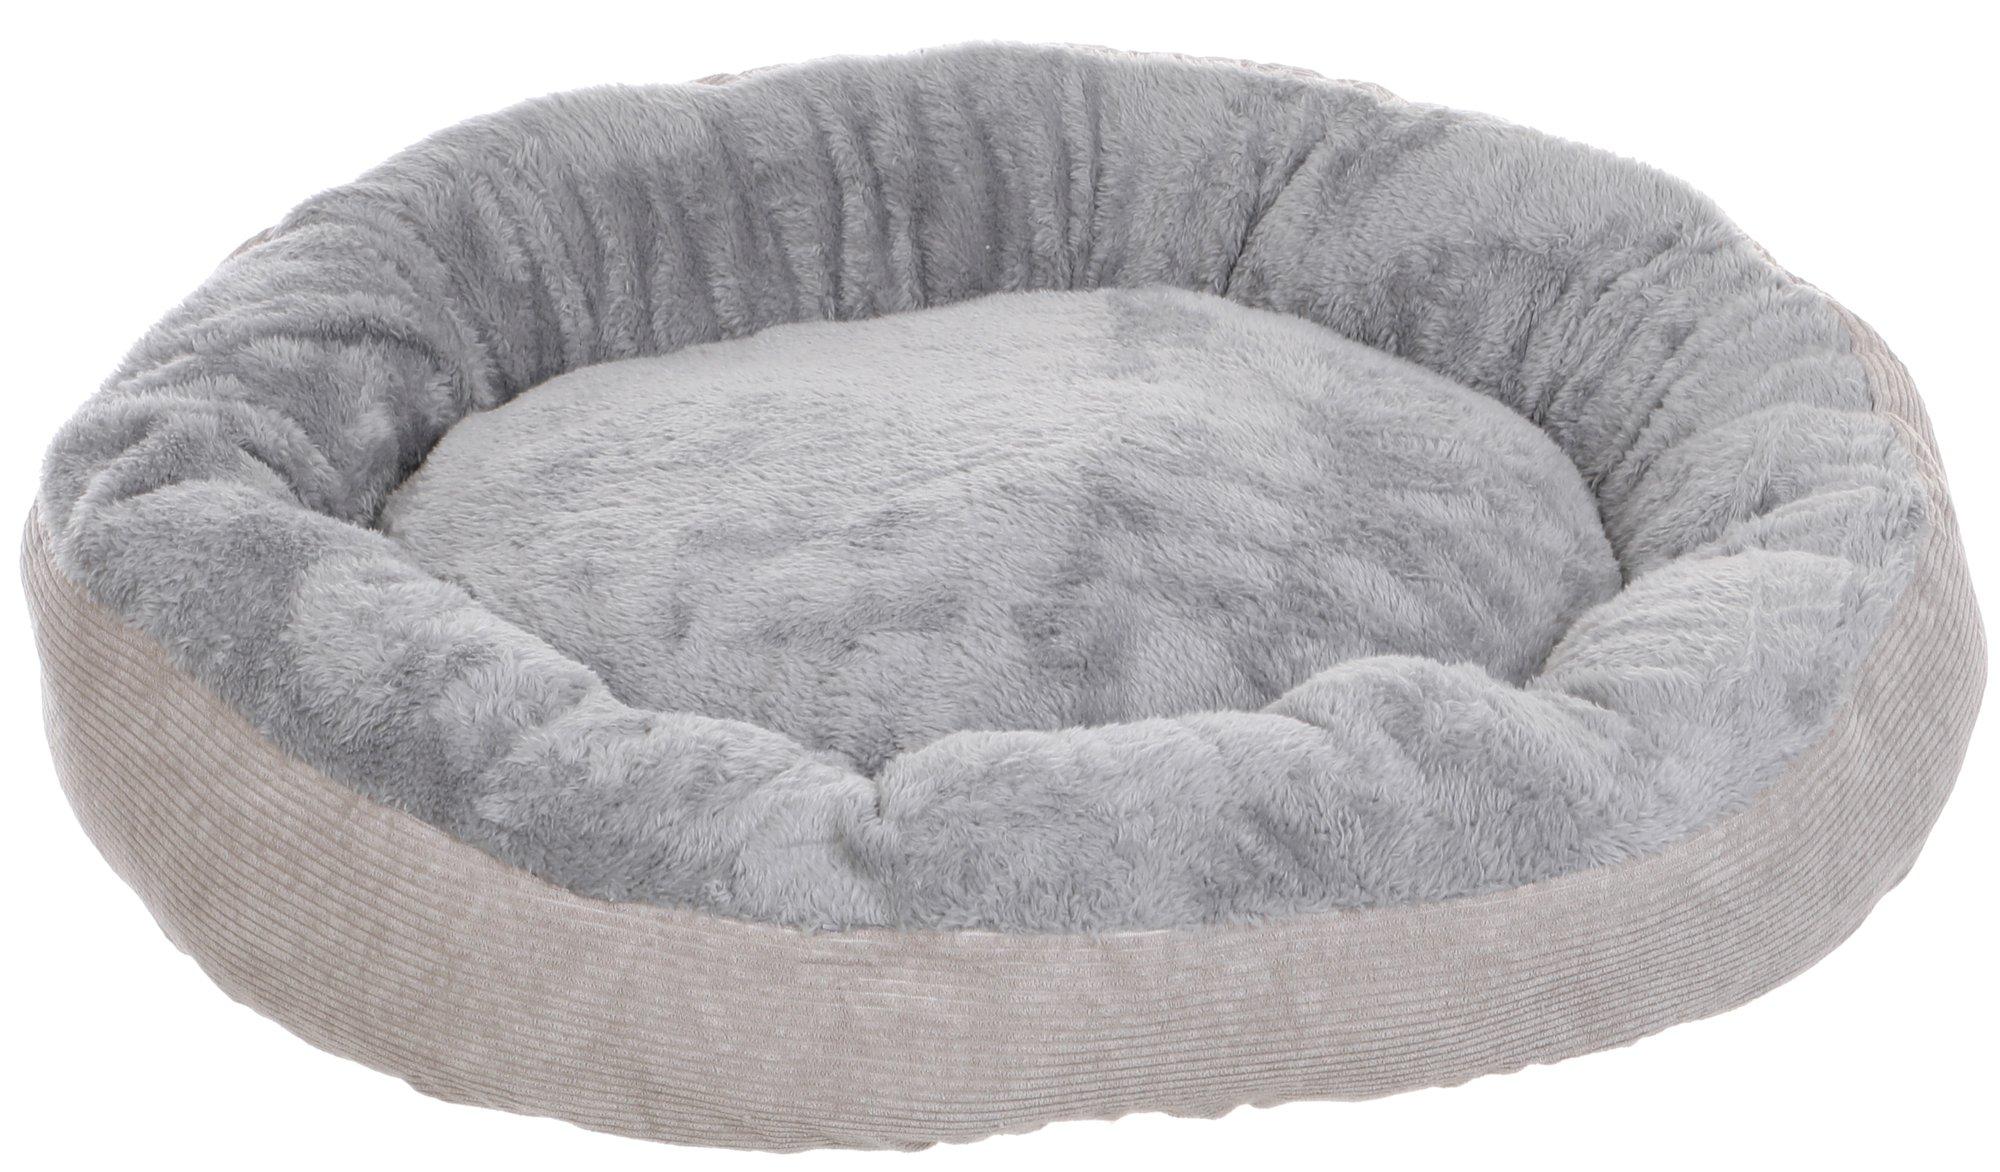 23 in. Round Plush Pet Bed